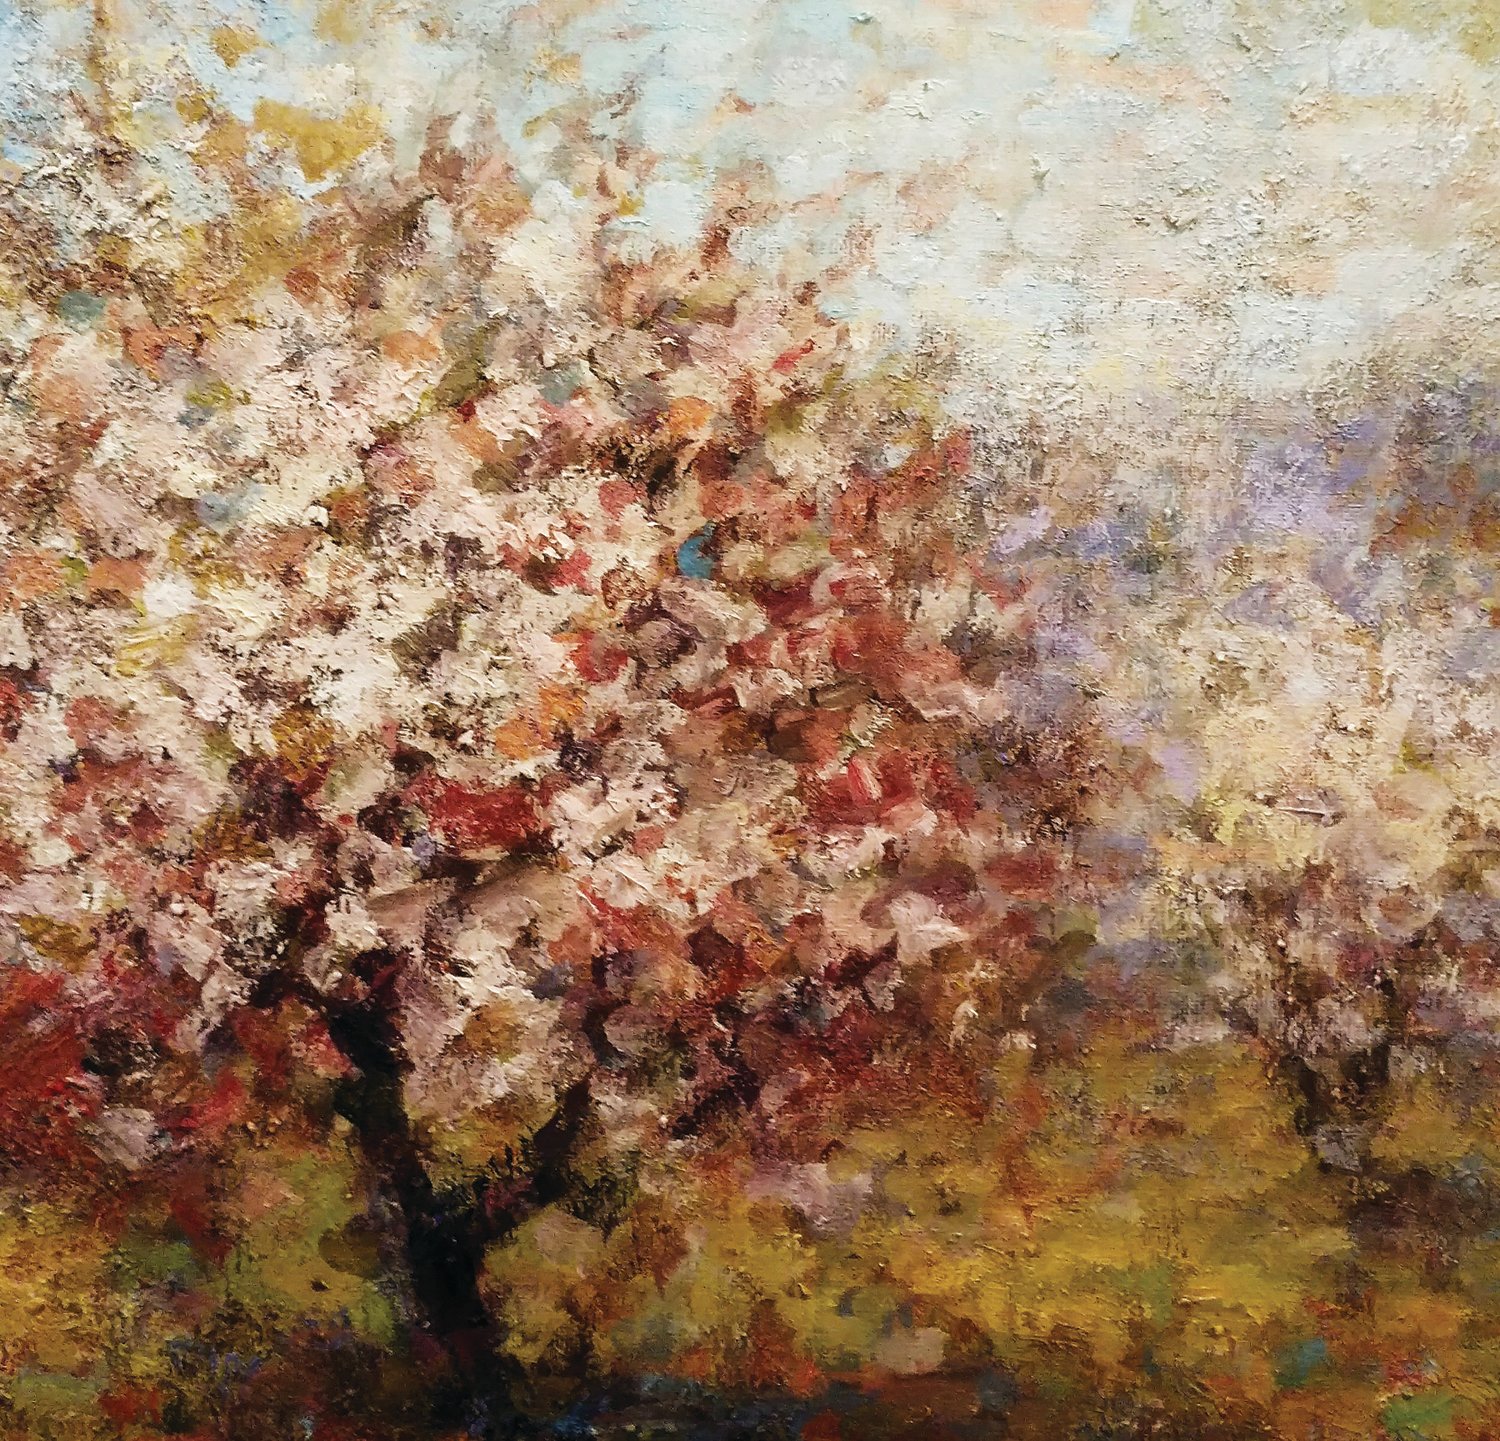 “Fleeting Blossoms” by Jim Lukens is part of the Spring Group Art Show at Chapman Gallery in Doylestown.